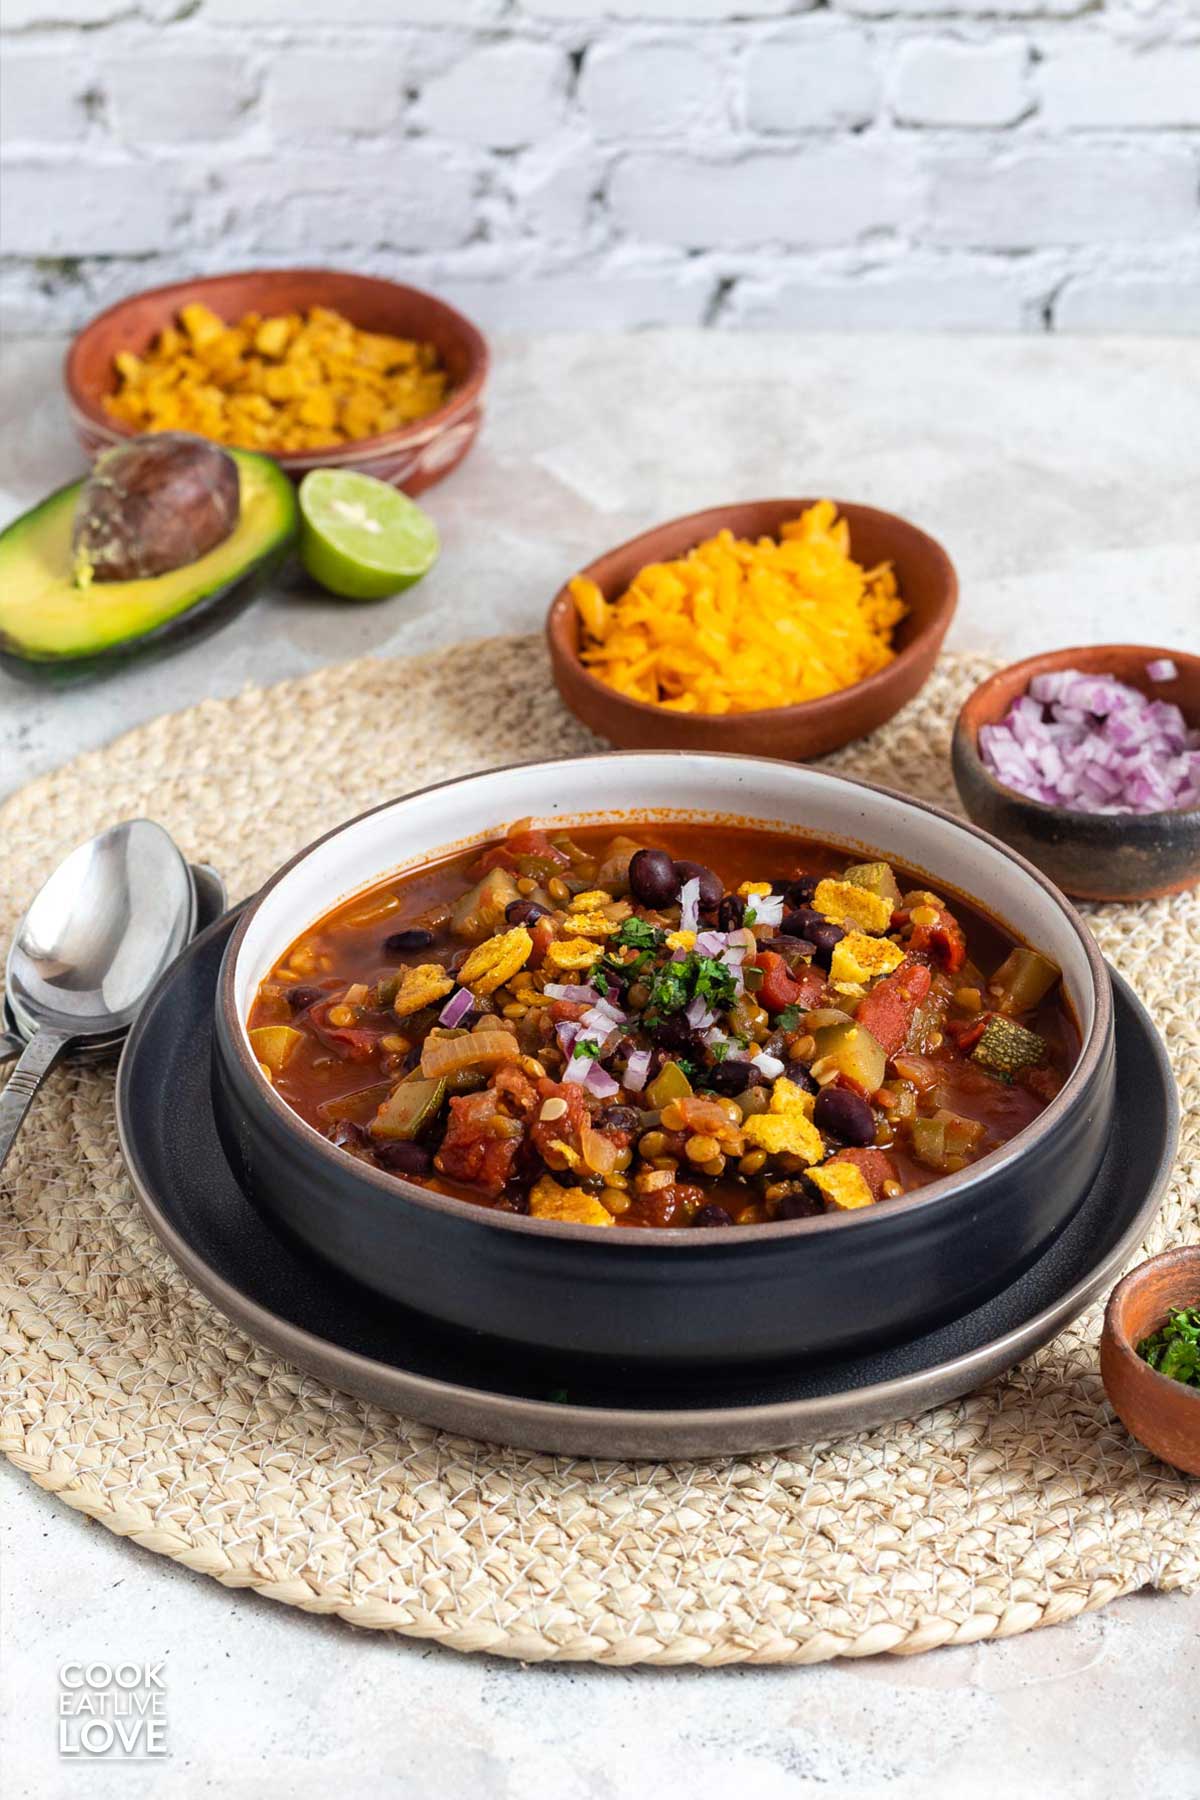 A bowl of vegetarian chili on the table with bowls of cheese, red onions and cilantro.